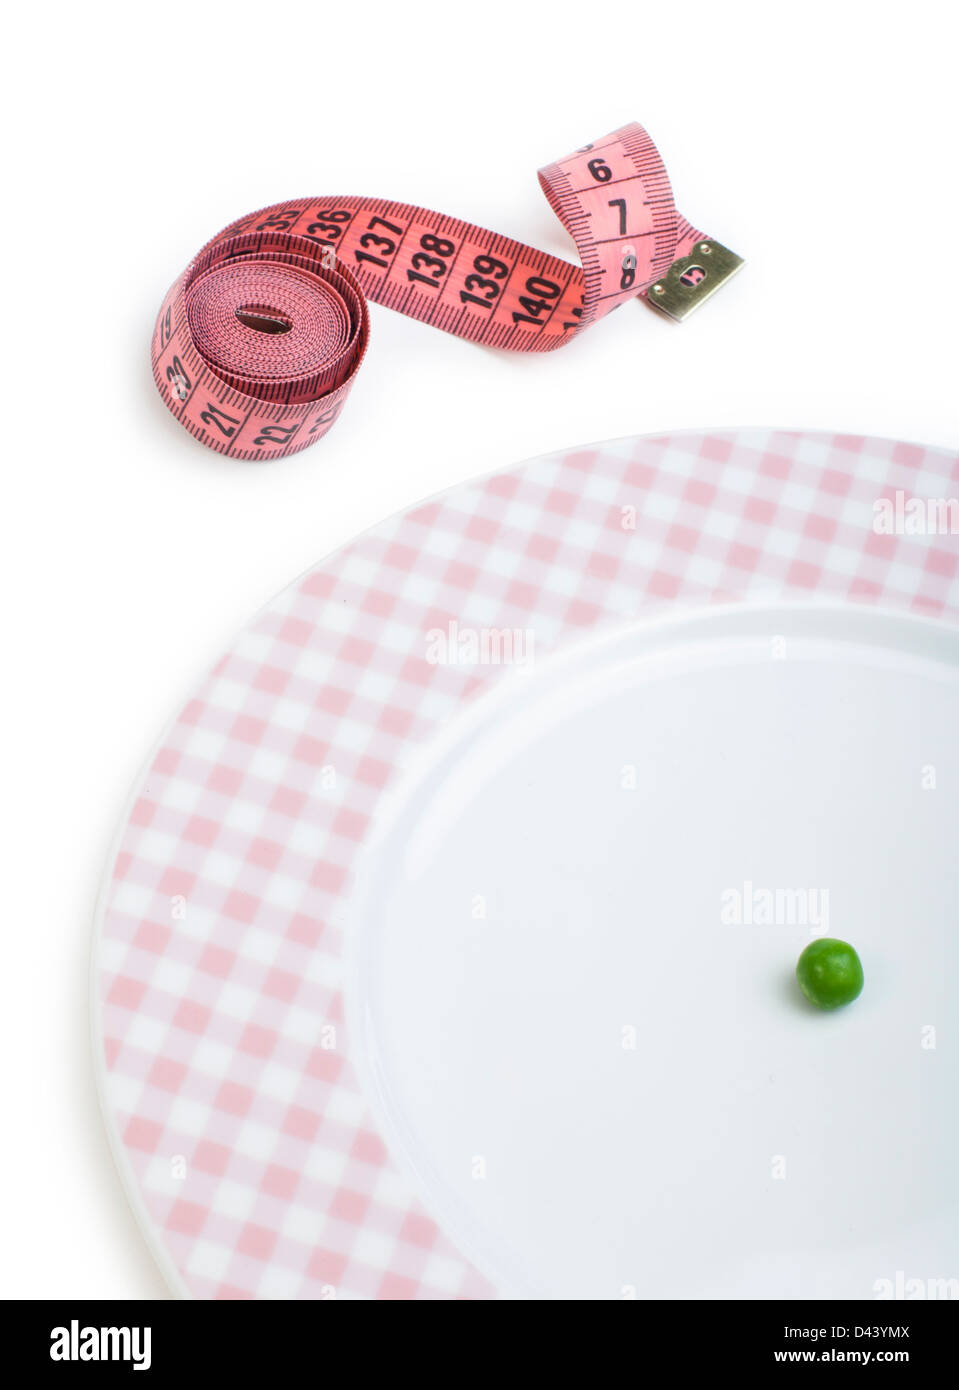 Plate with one peas. Dumbbell and centimeter measure. Studio shot Stock Photo